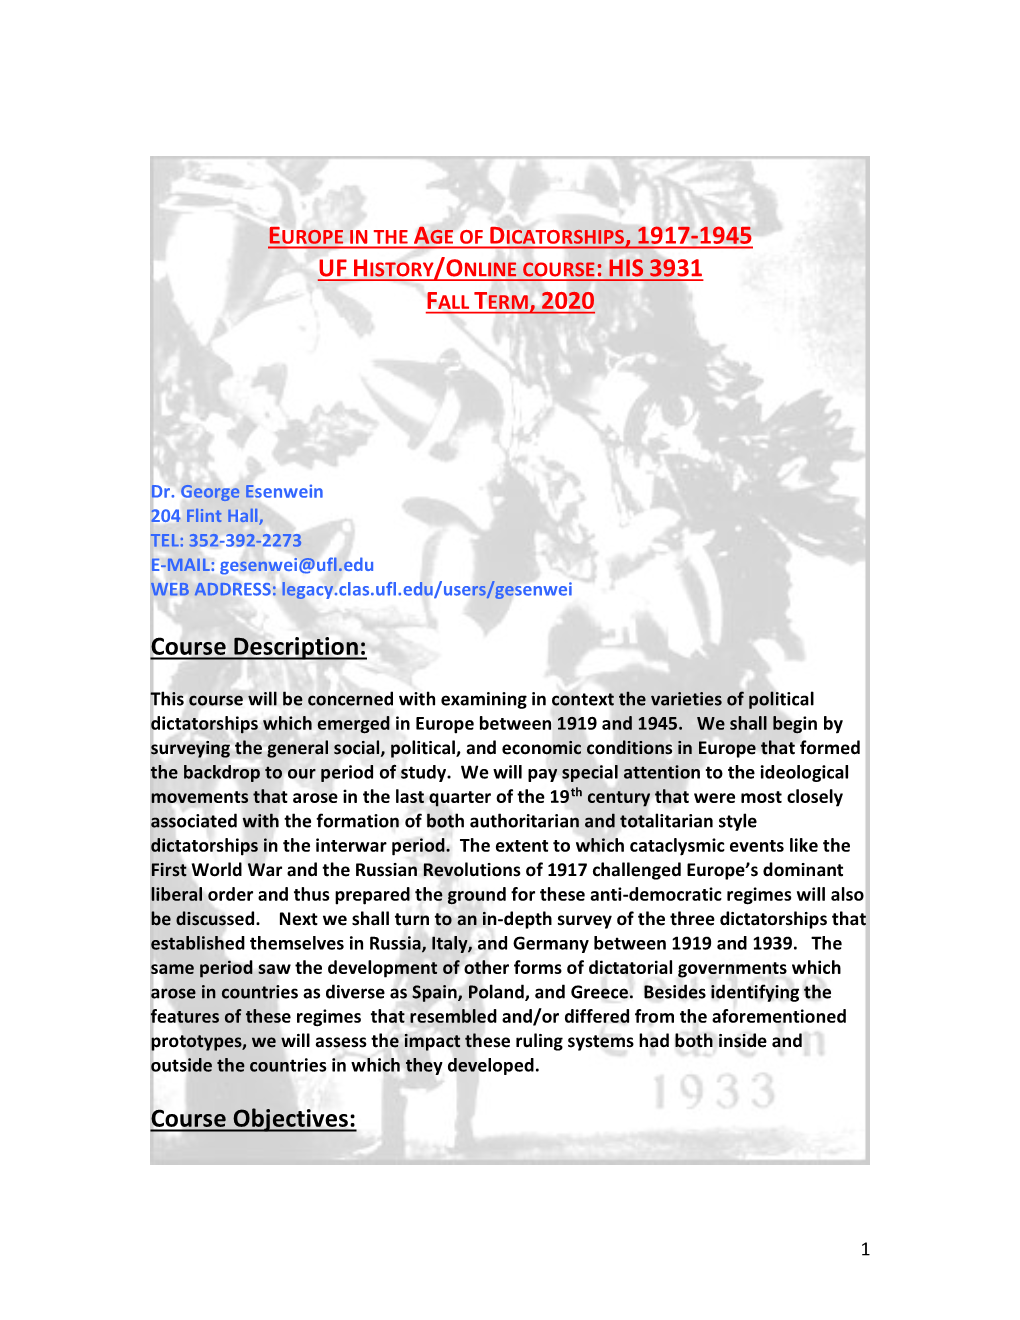 Europe in the Age of Dicatorships, 1917-1945 Uf History/Online Course: His 3931 Fall Term, 2020